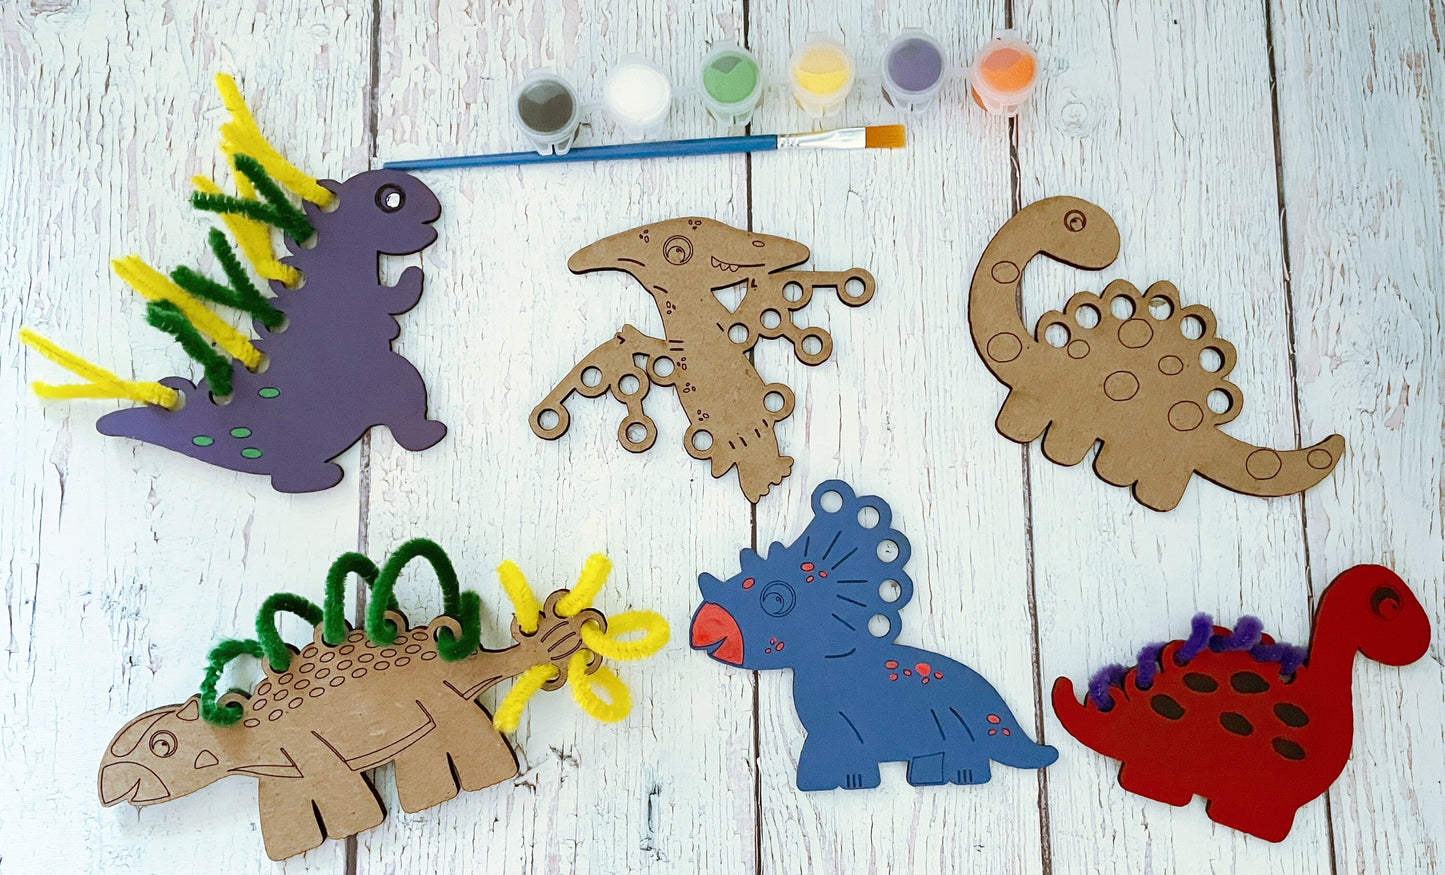 Craft Kits for Kids, Christmas Crafts, Toddler Craft Kits, DIY Toddler Craft Kit, Dinosaur Crafts for Kids, Pretend Play Dinosaurs